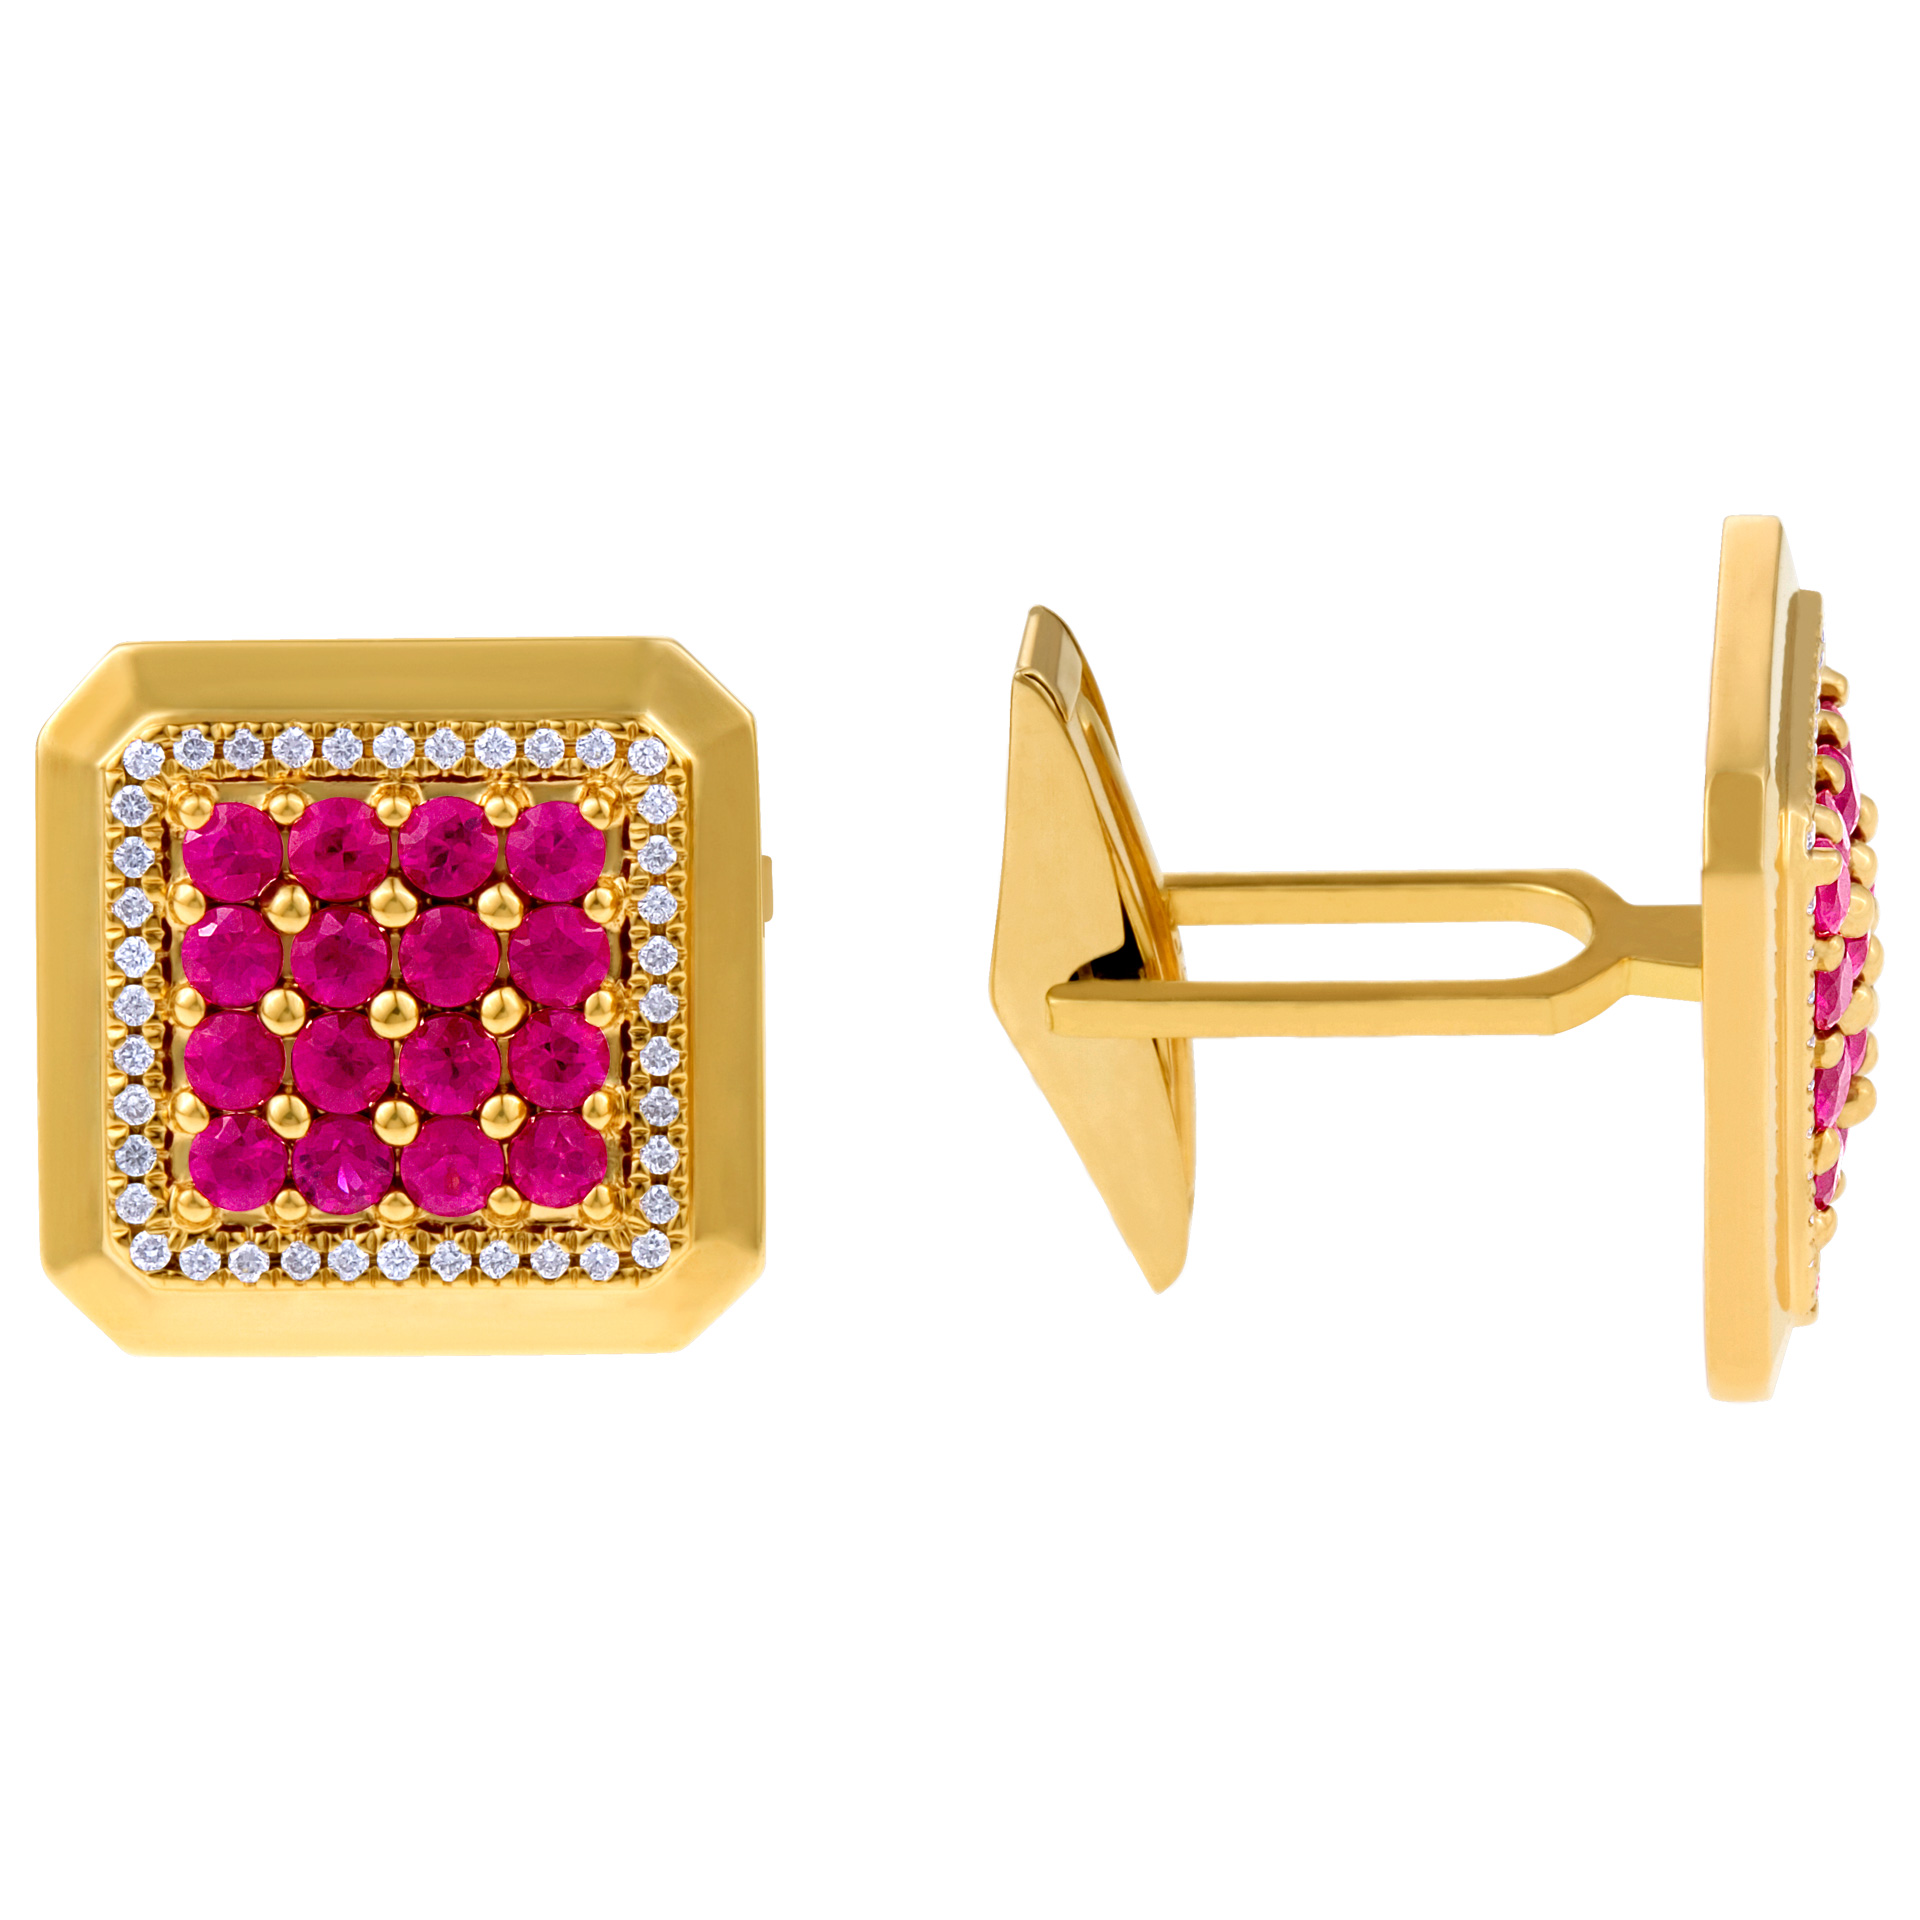 Exquisite diamond and ruby cufflinks in 18k yellow gold